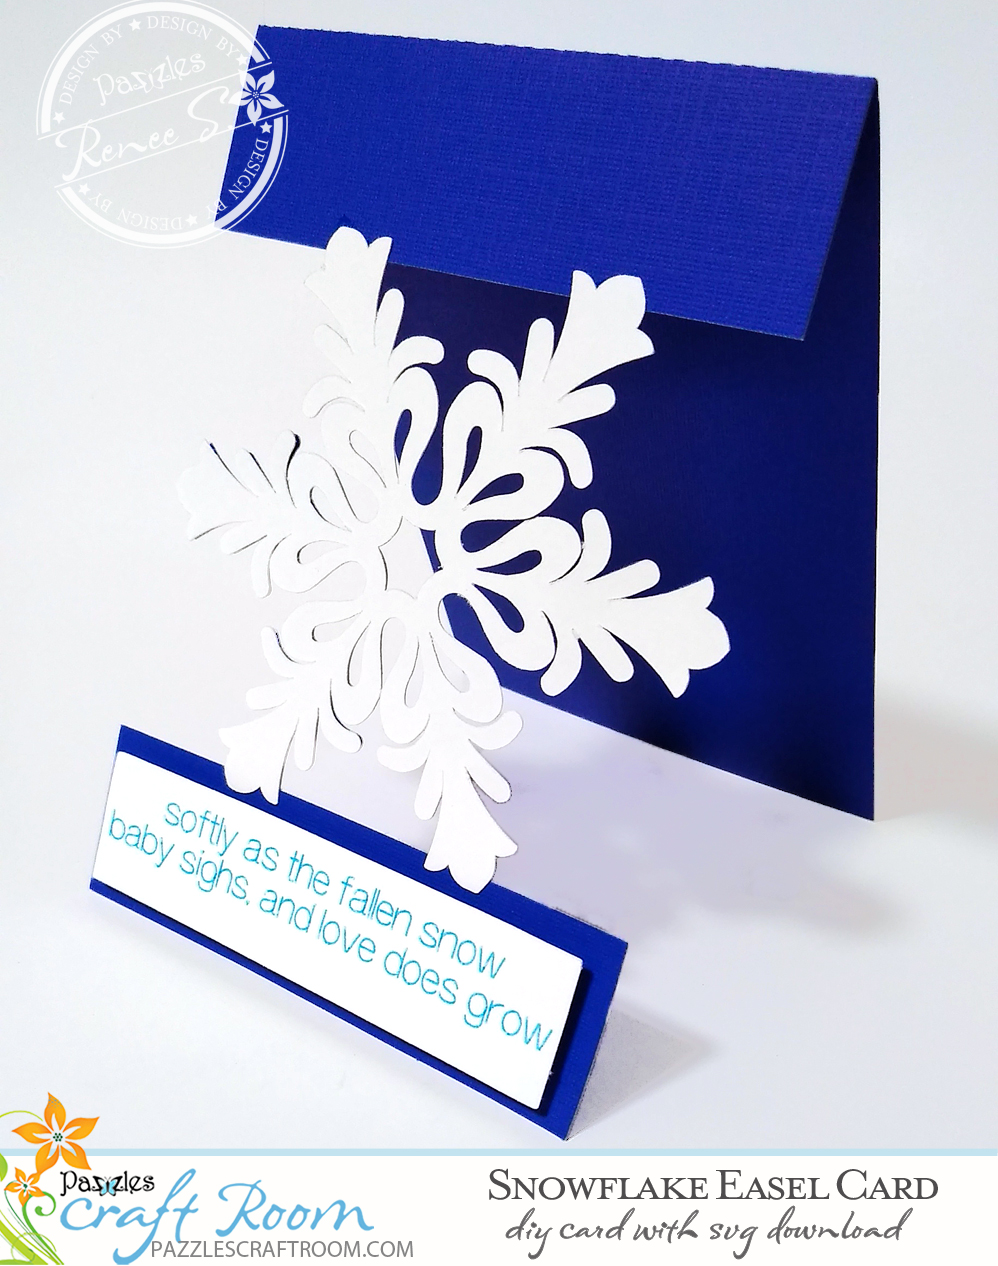 Pazzles DIY Snowflake Easel Card with instant SVG download. Compatible with all major electronic cutters including Pazzles Inspiration, Cricut, and Silhouette Cameo. Design by Renee Smart.